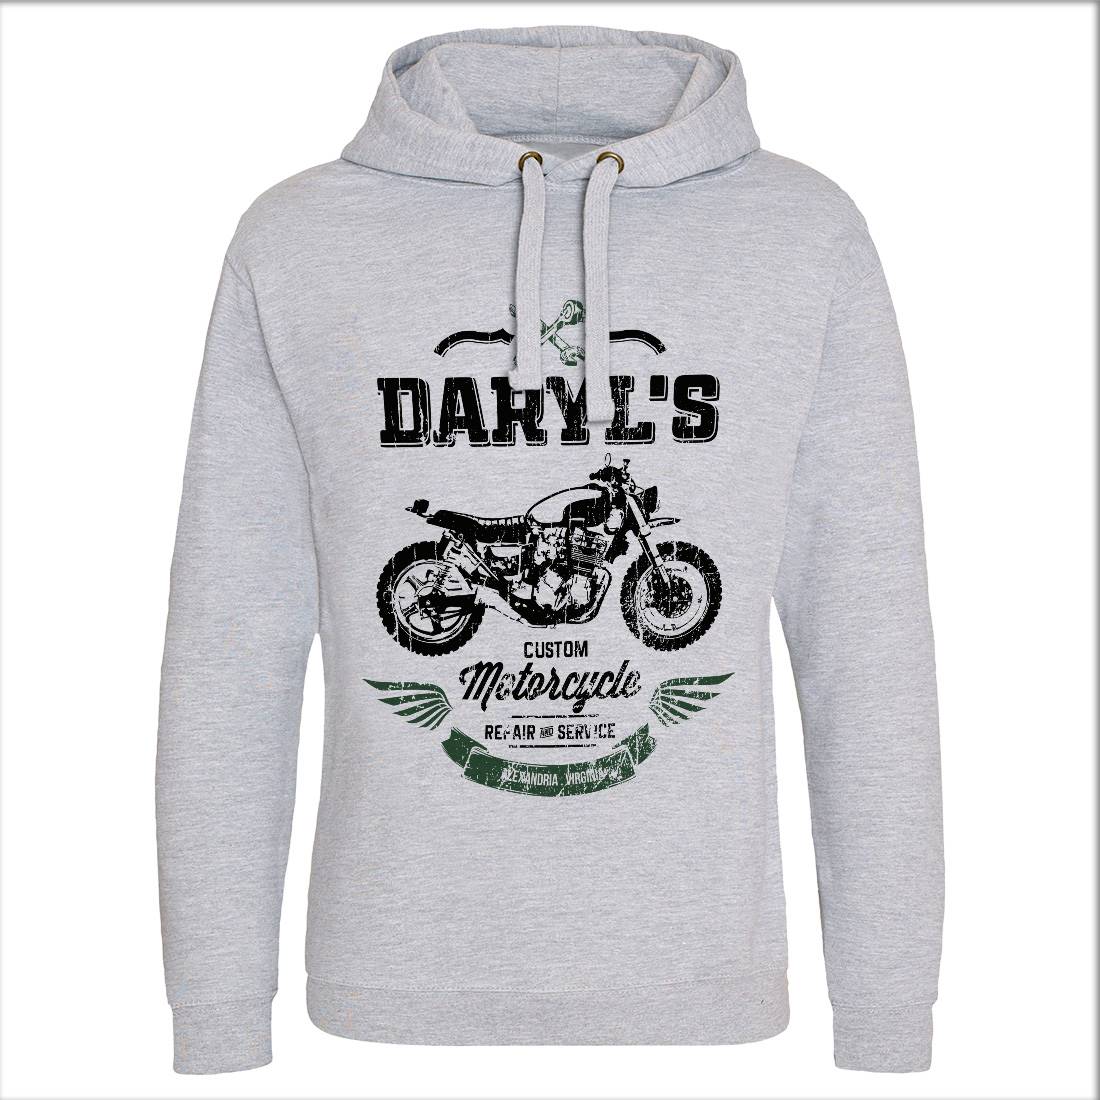 Daryls Custom Mens Hoodie Without Pocket Motorcycles D229